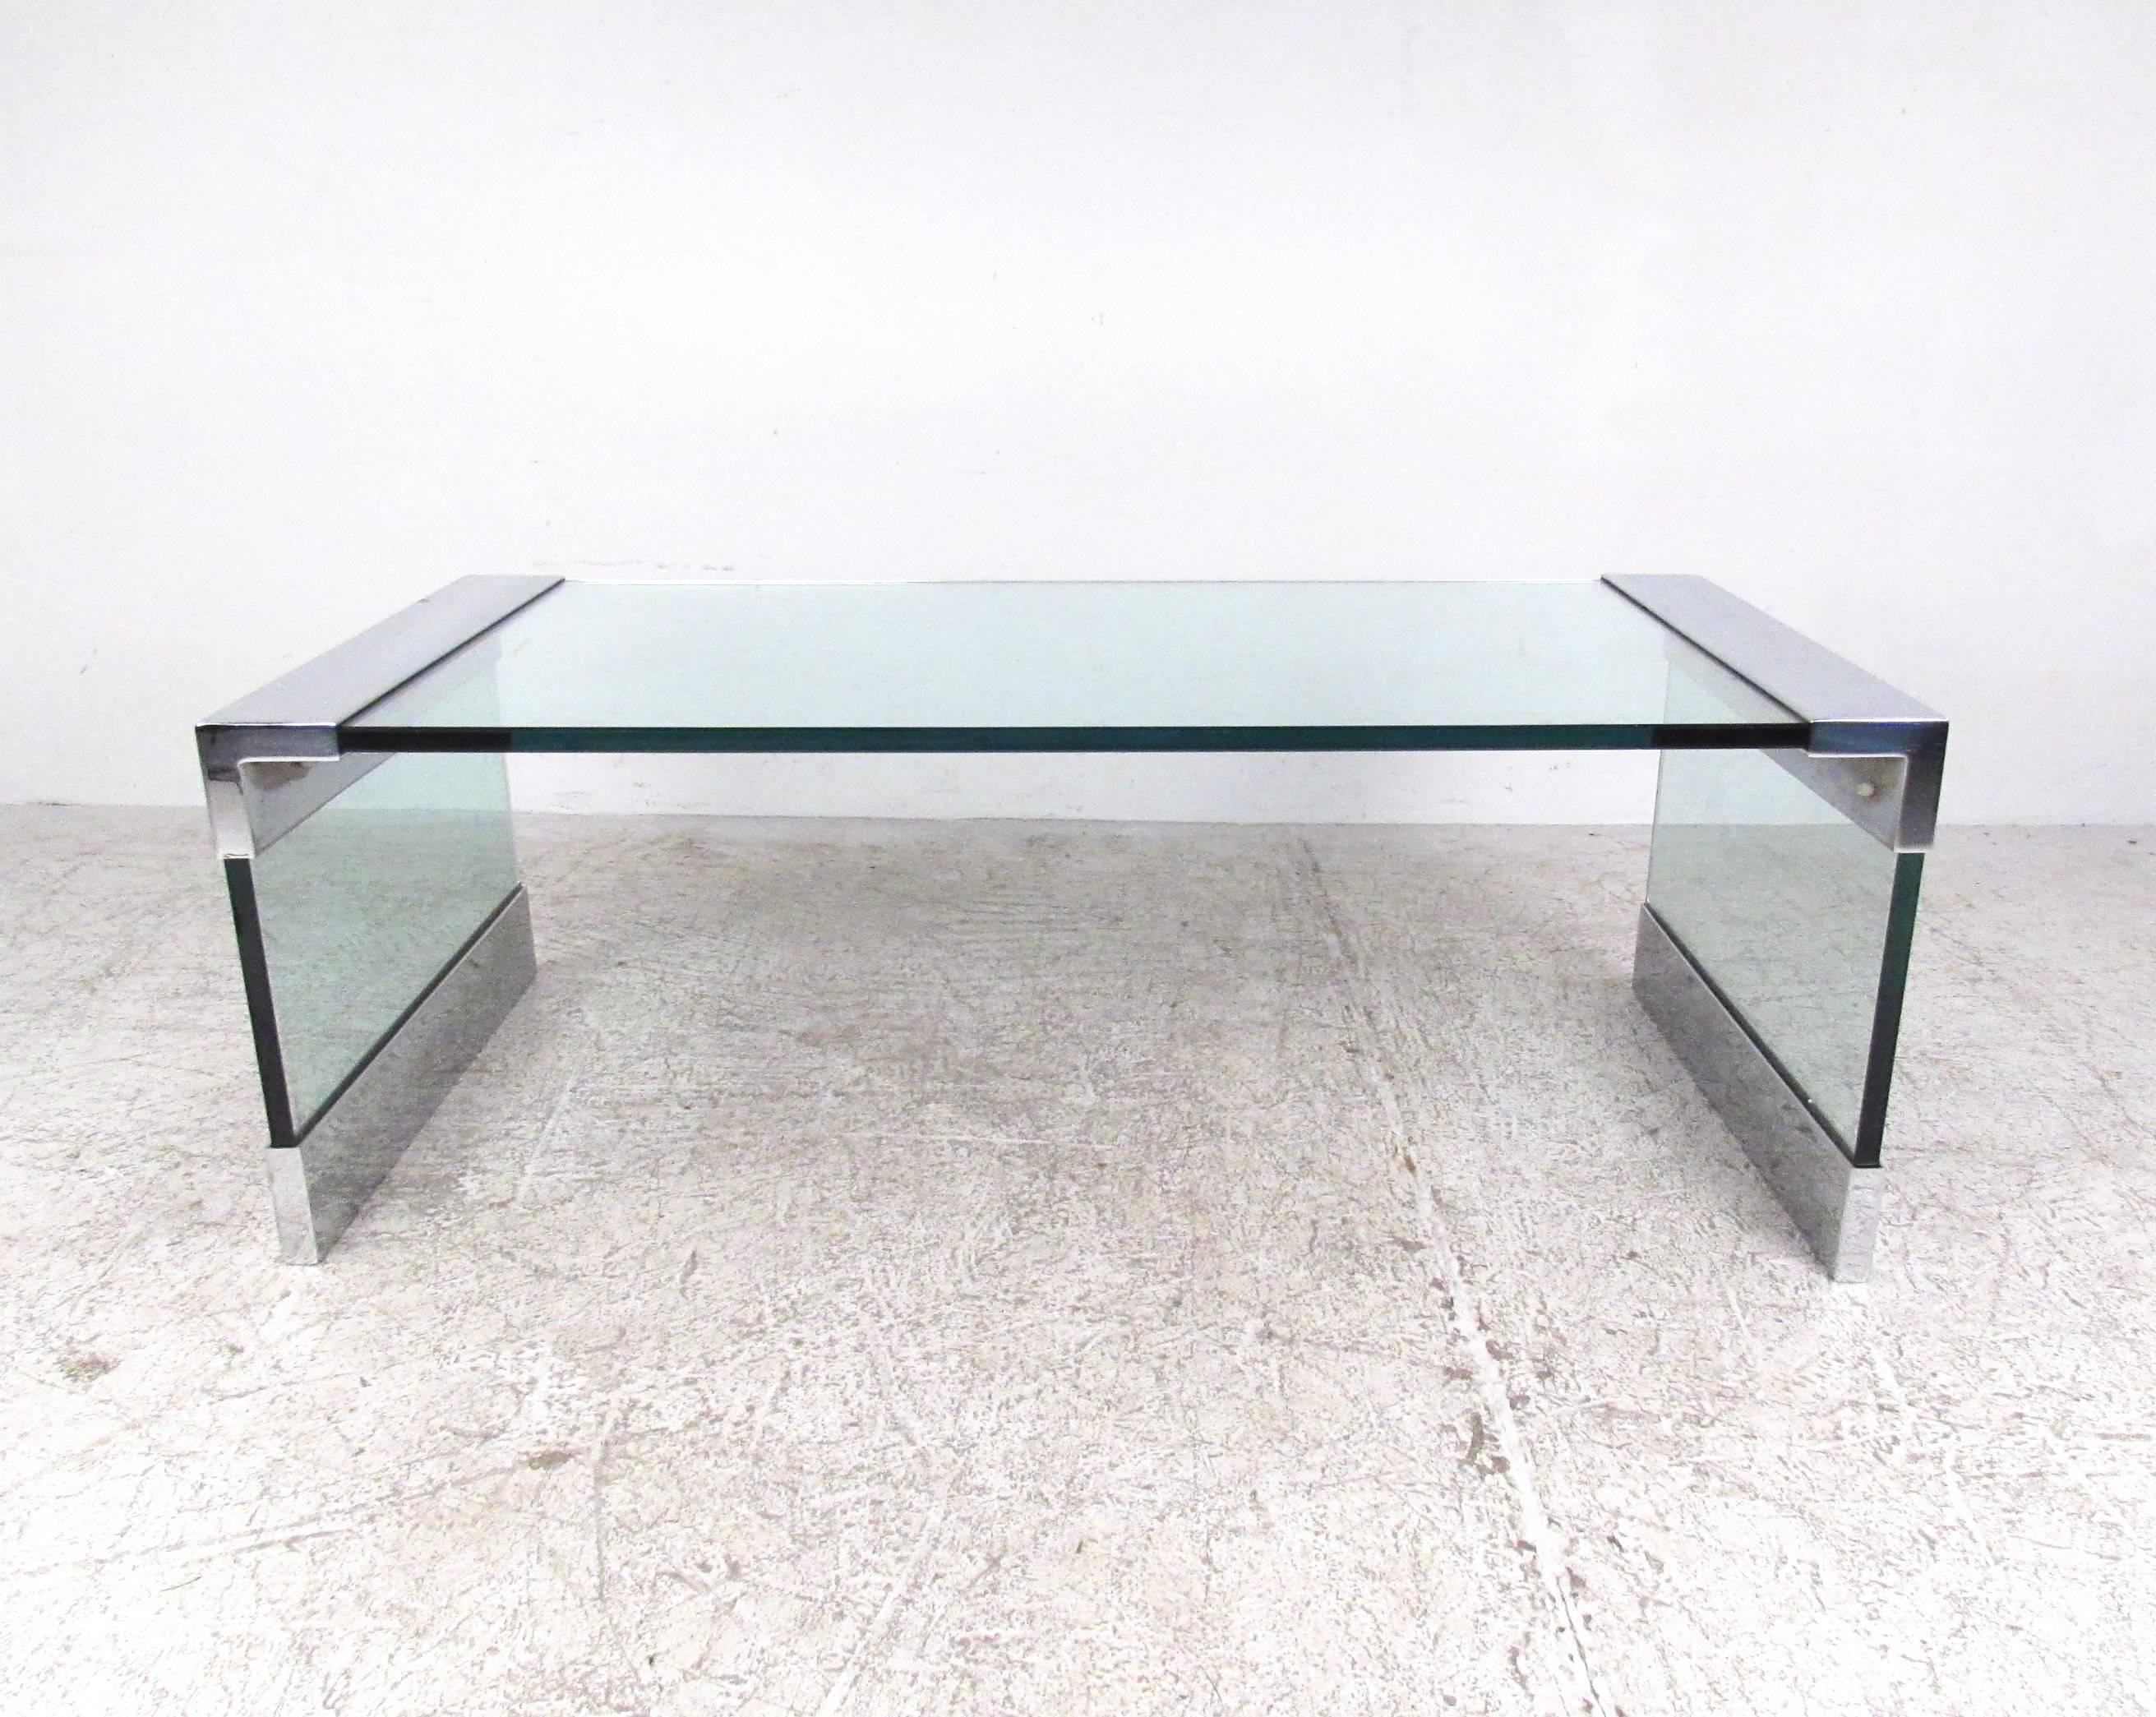 This uniquely angular coffee table features impressive Mid-Century style with quality chrome and glass construction. Thick glass top and sled legs are protected and accented by heavy chrome fittings. Similar in style to the popular Pace designed